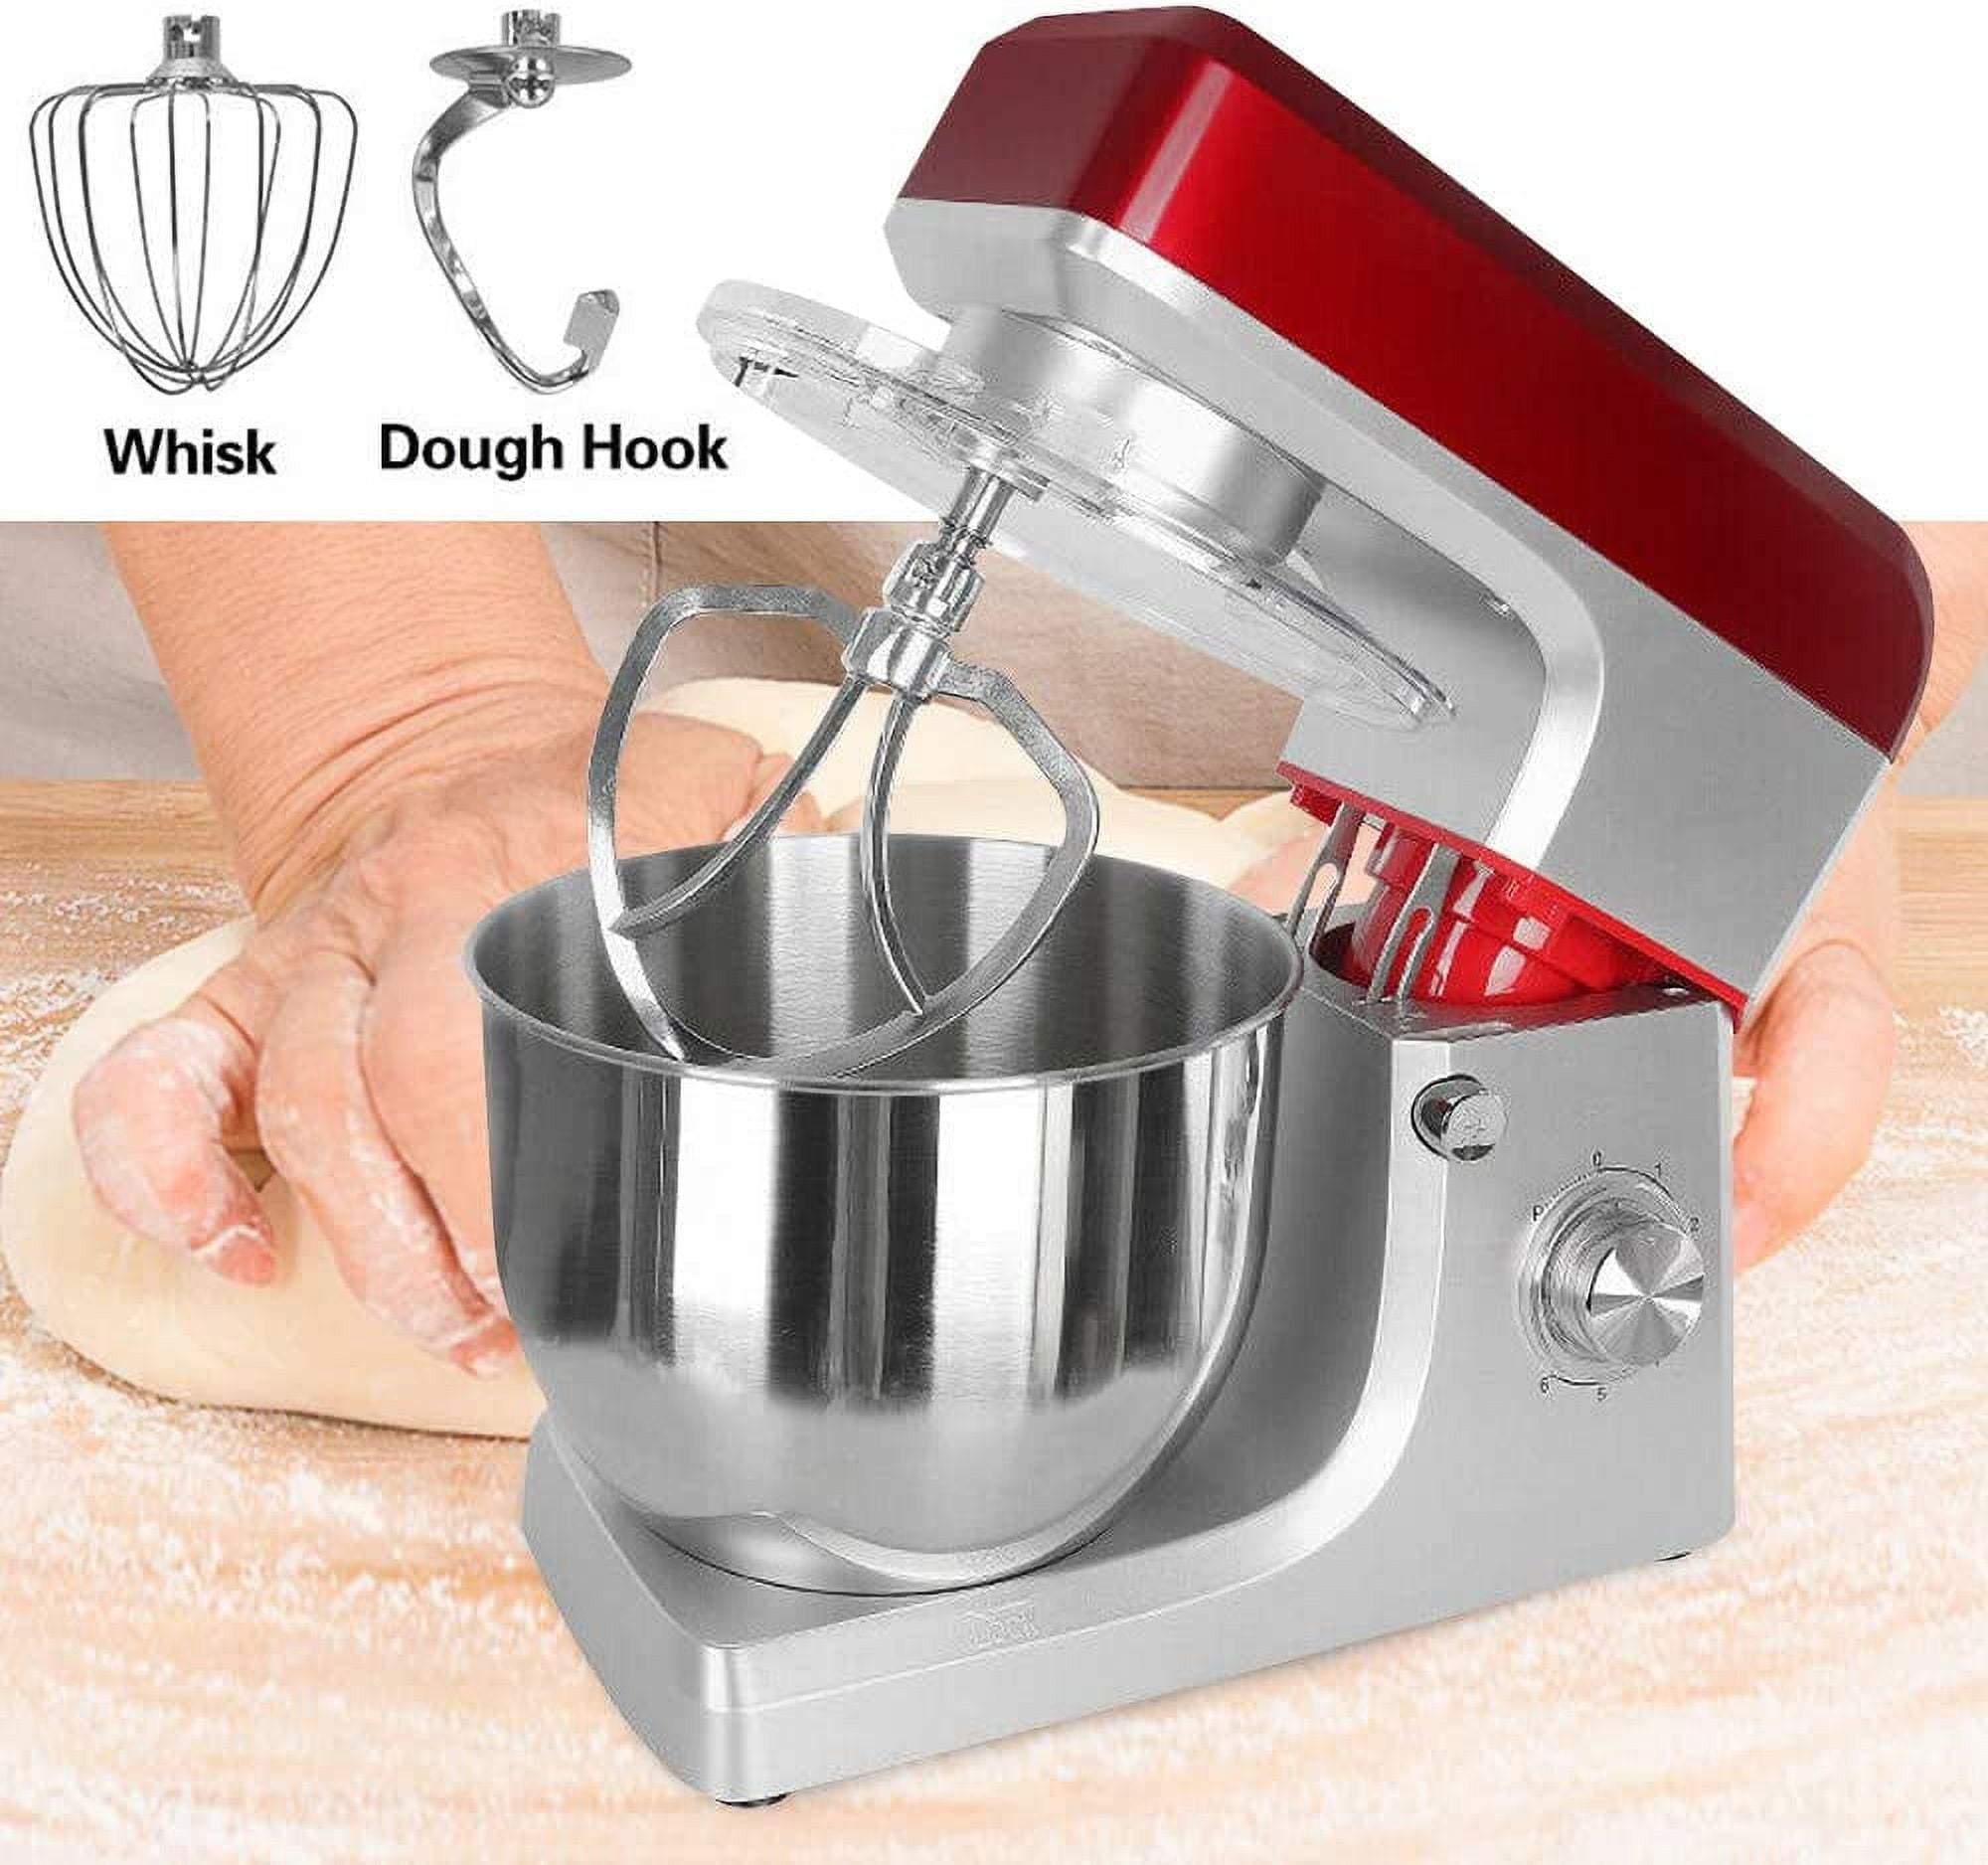 Stand Mixer for Kitchen, 7.4 QT Kitchen Electric Stand Mixer, 6-Speed Dough  Mixer Chef Machine w/Dough Hook, Wire Whip, Beater, Tilt-Head Electric  Standing Mixer Food Mixer for Baking, Black, A5017 